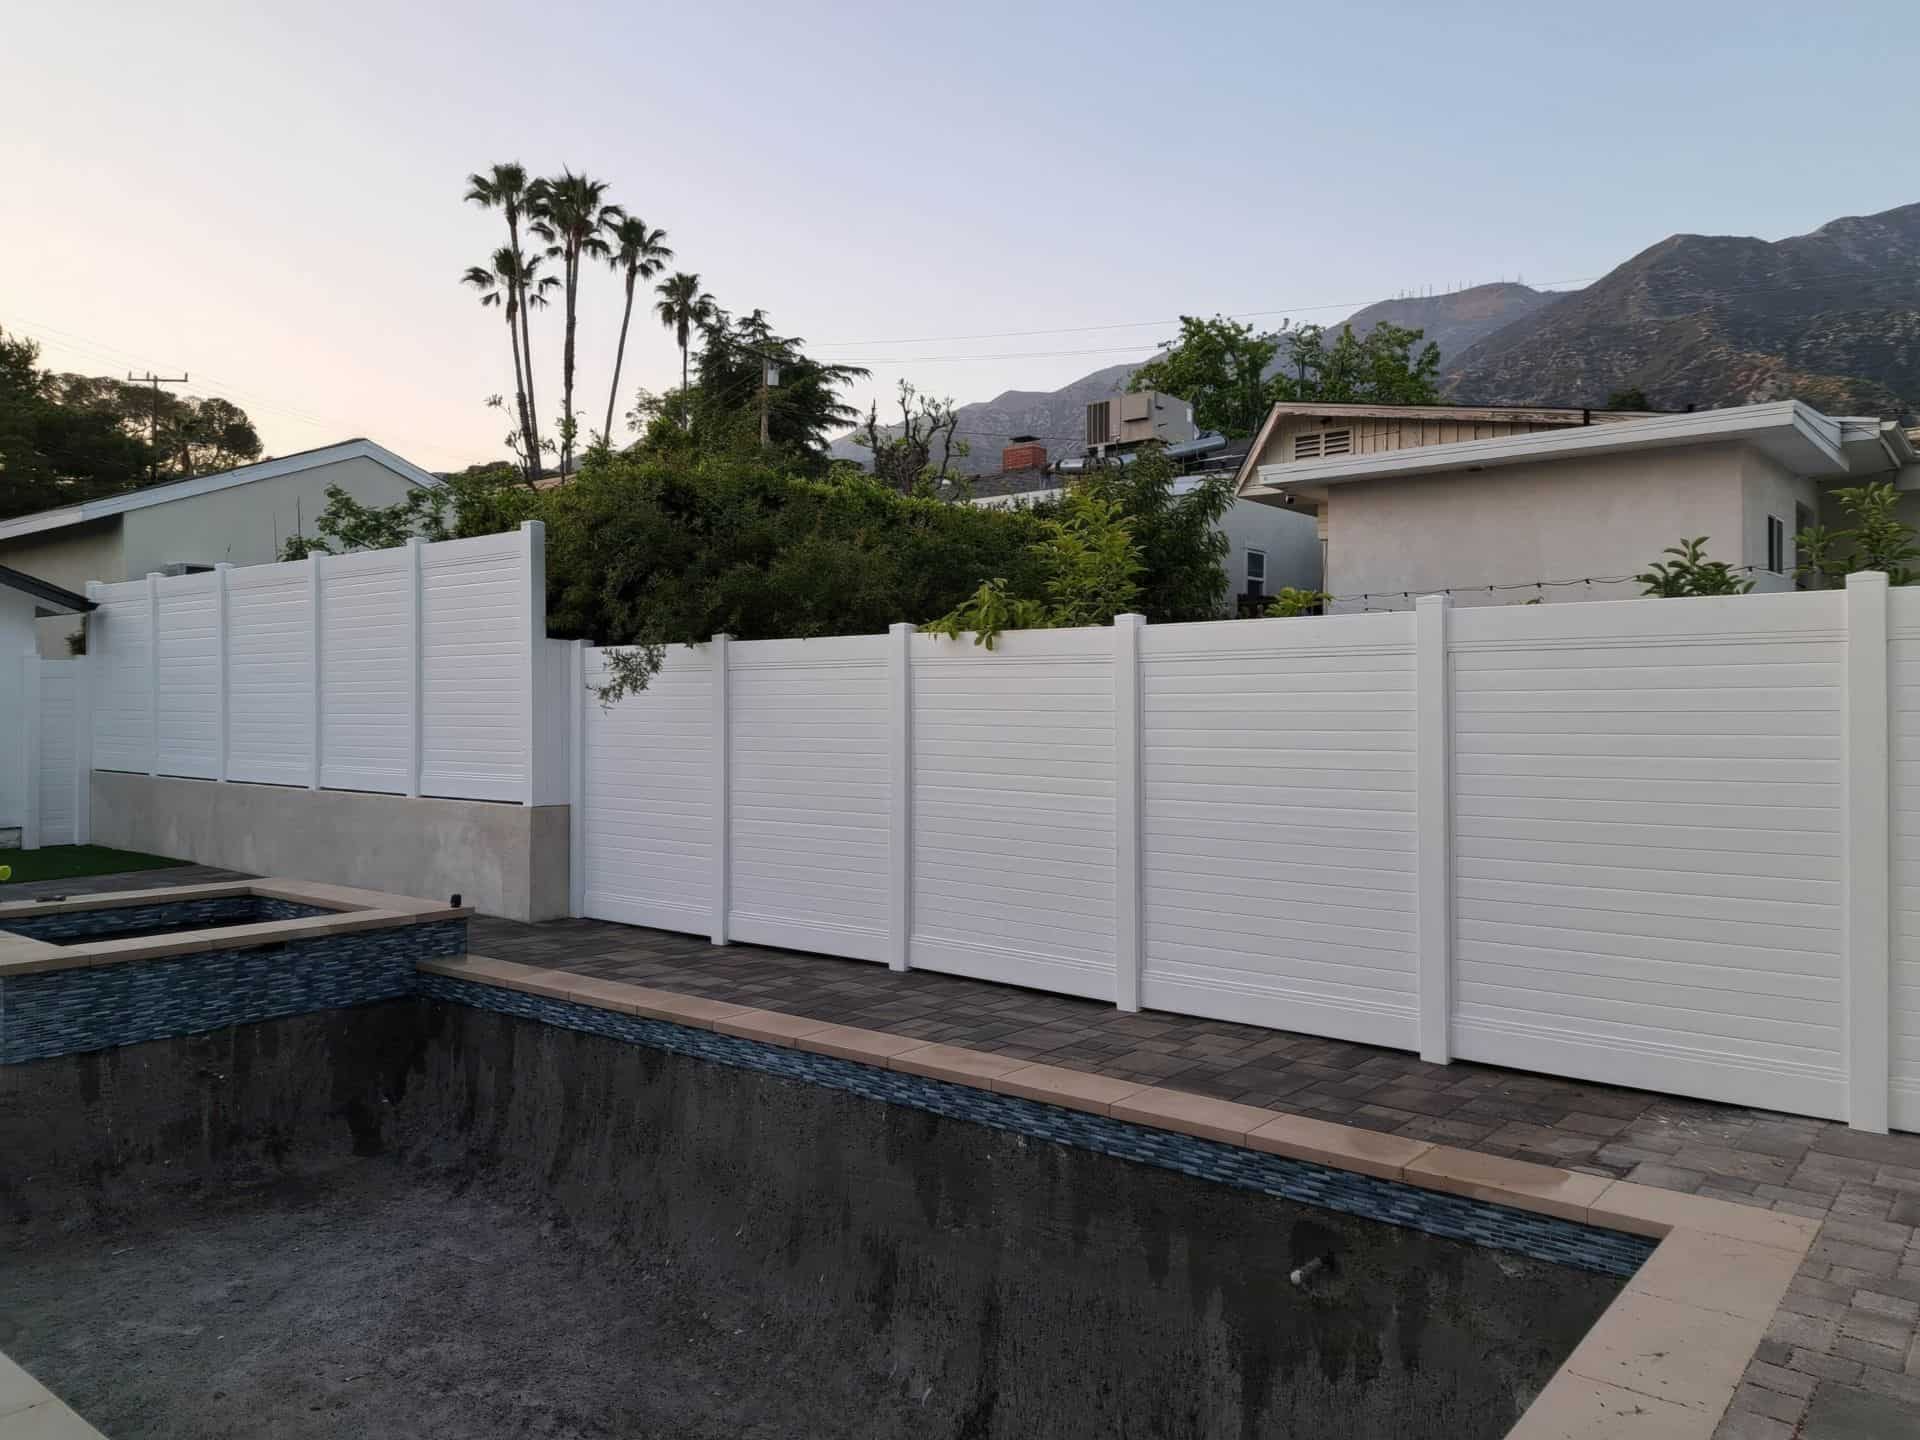 Vinyl privacy horizontal fence creating boundary around swimming pool with jacuzzi and elevated backyard